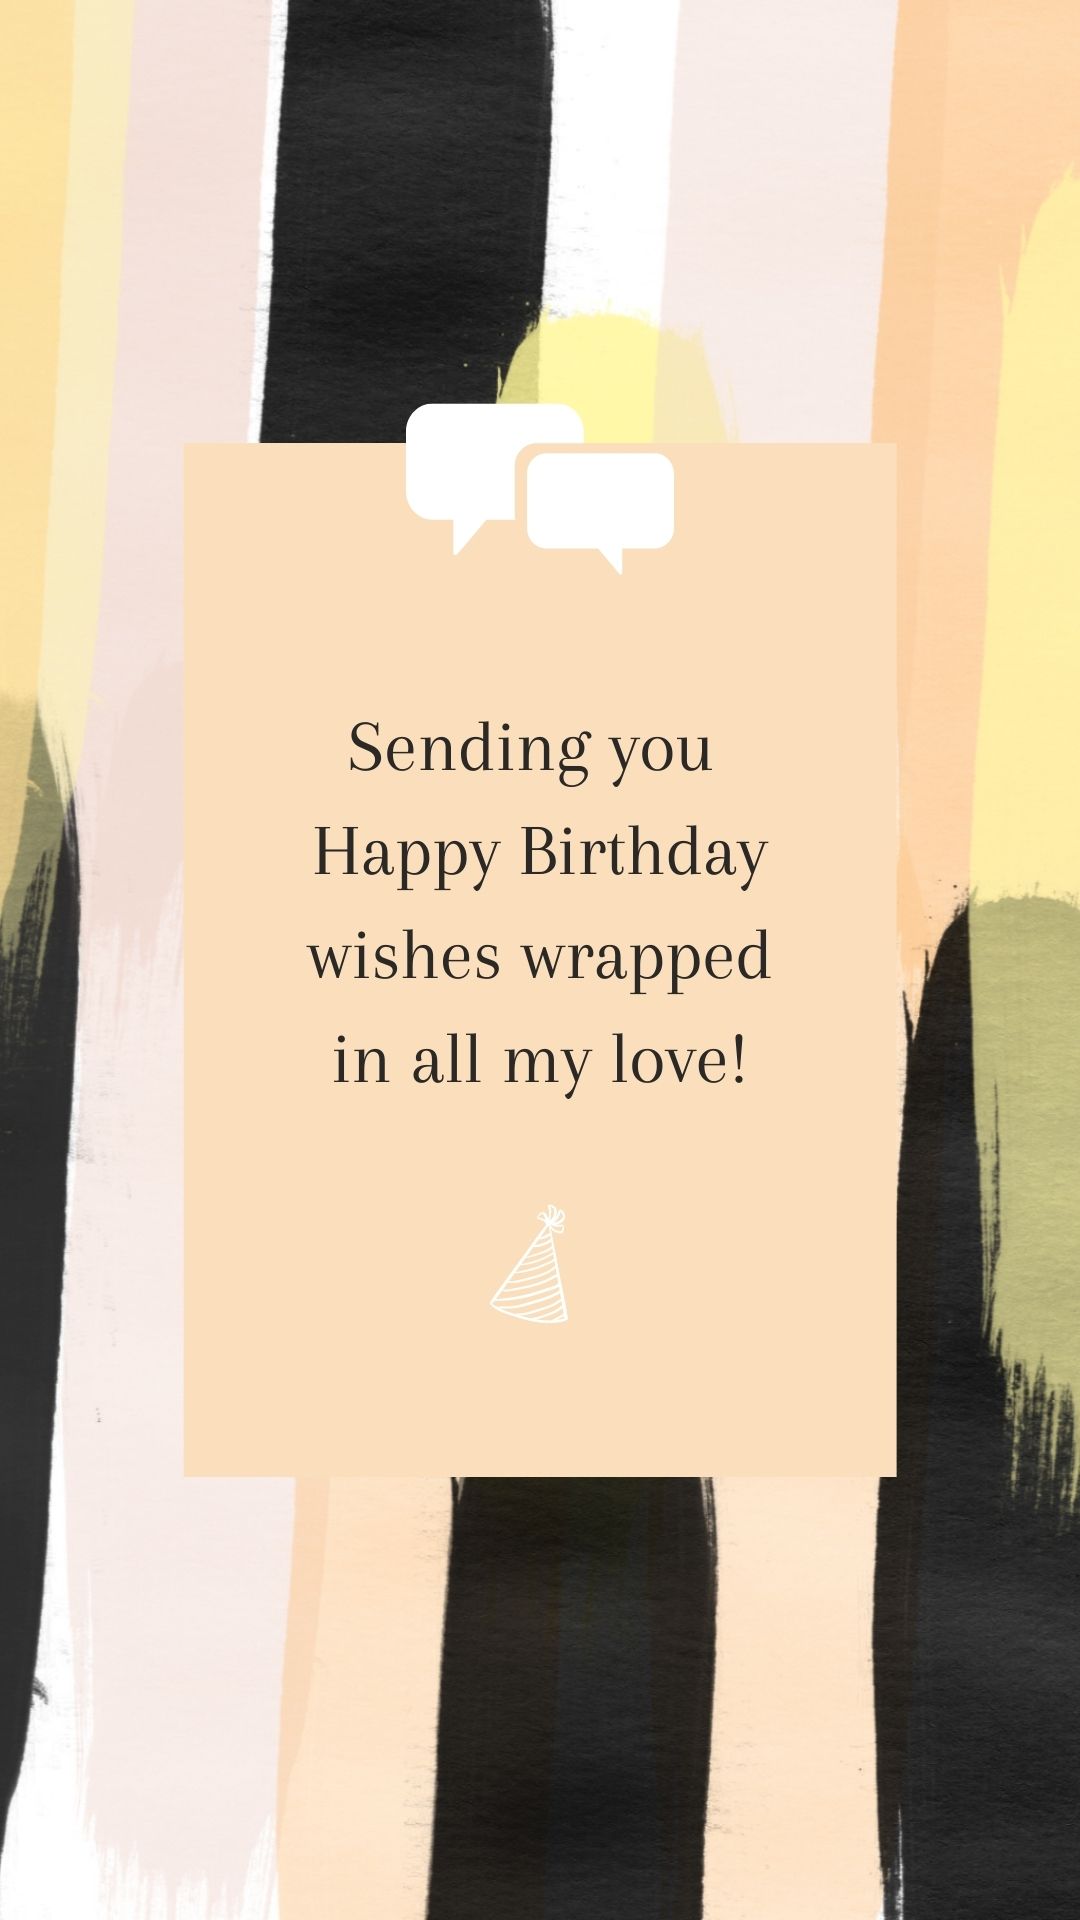 Happy birthday instagram story background with wishes message